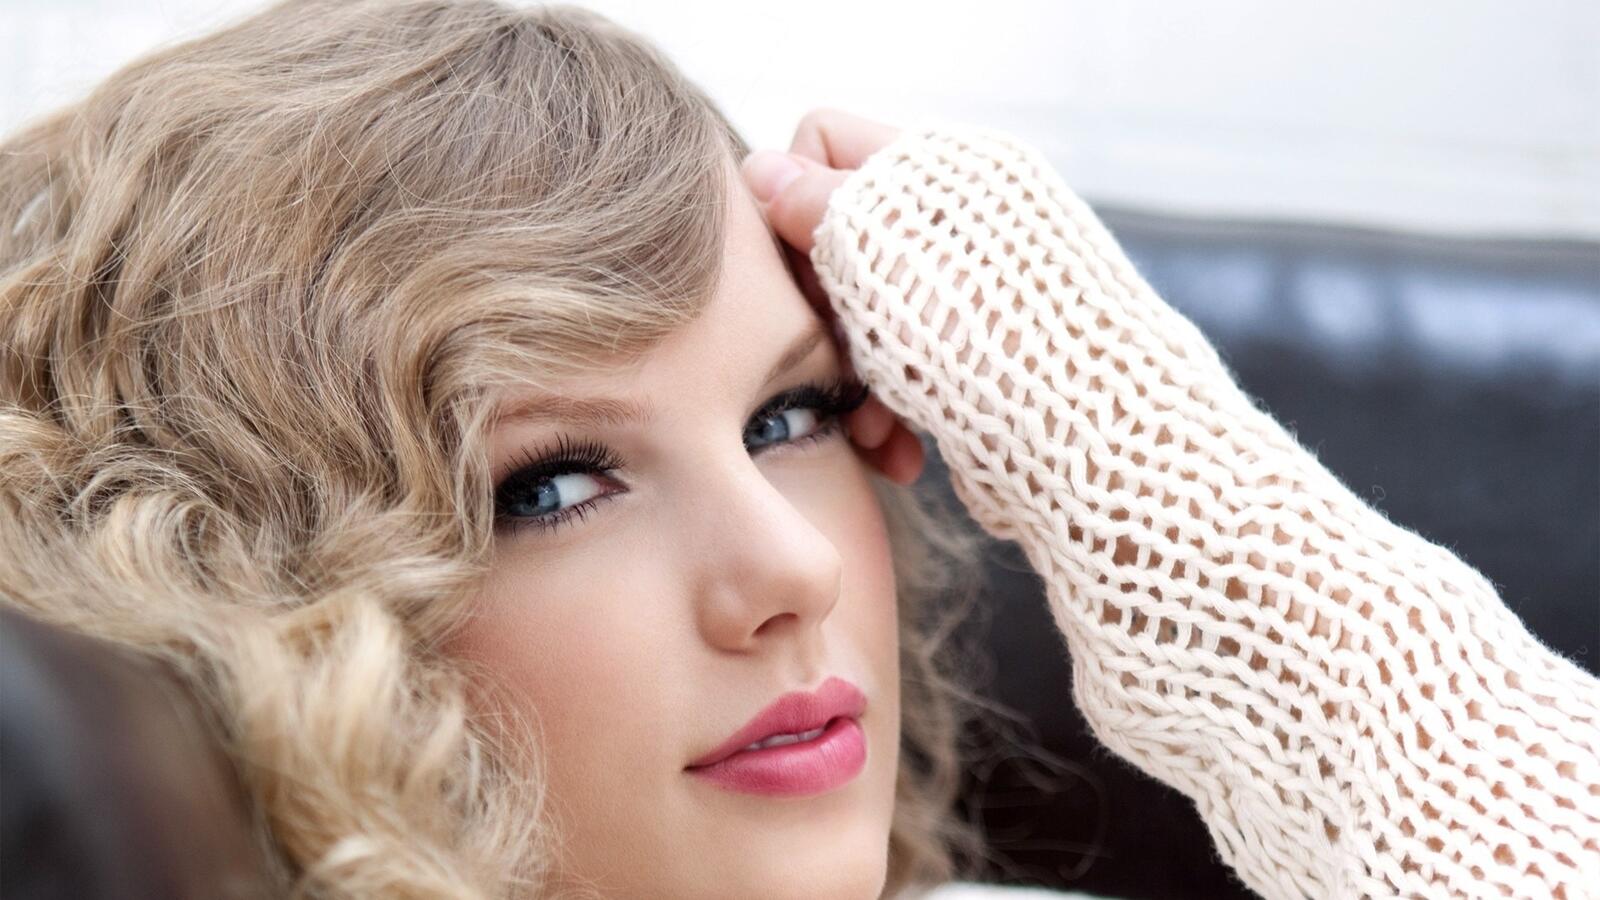 Wallpapers babe face taylor swift on the desktop